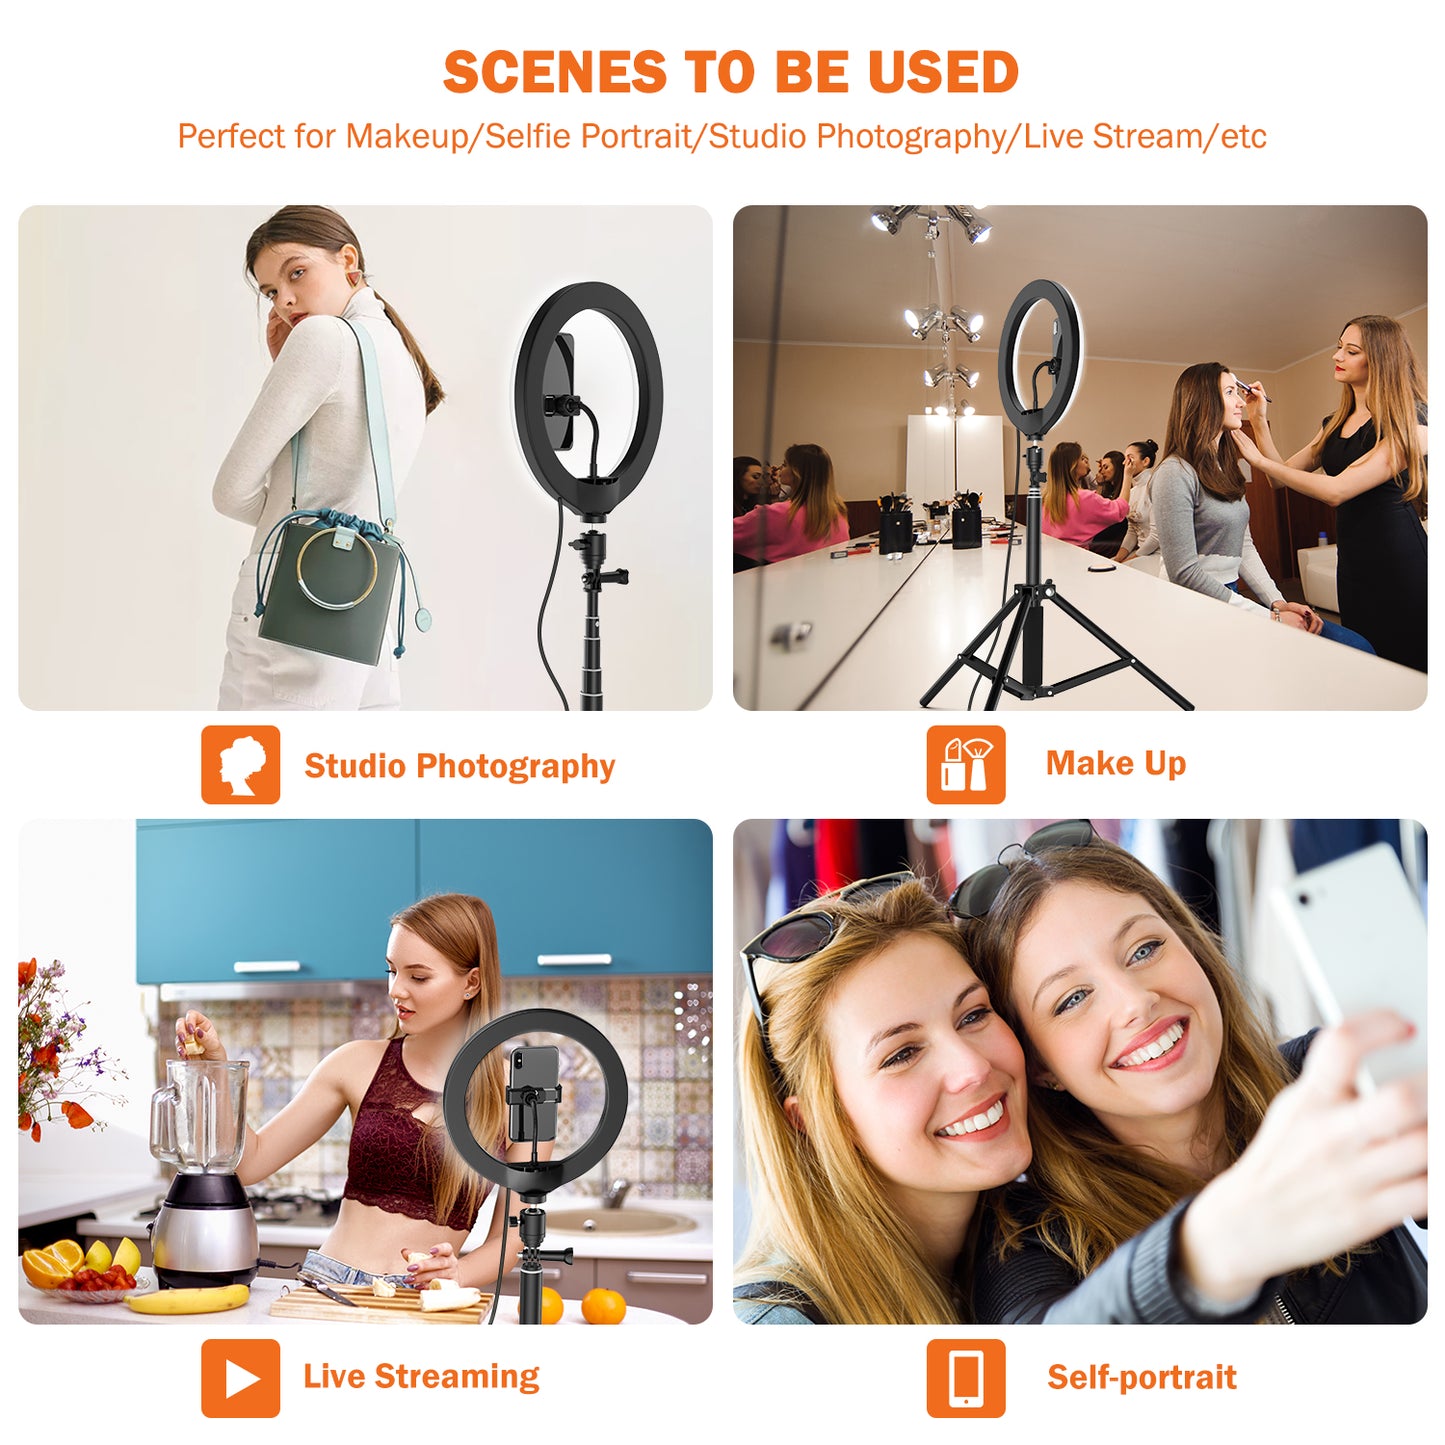 Jeemak 10" Selfie Ring Light with Stand and 2 Phone Holder, for Makeup/Live Streaming/YouTube Video